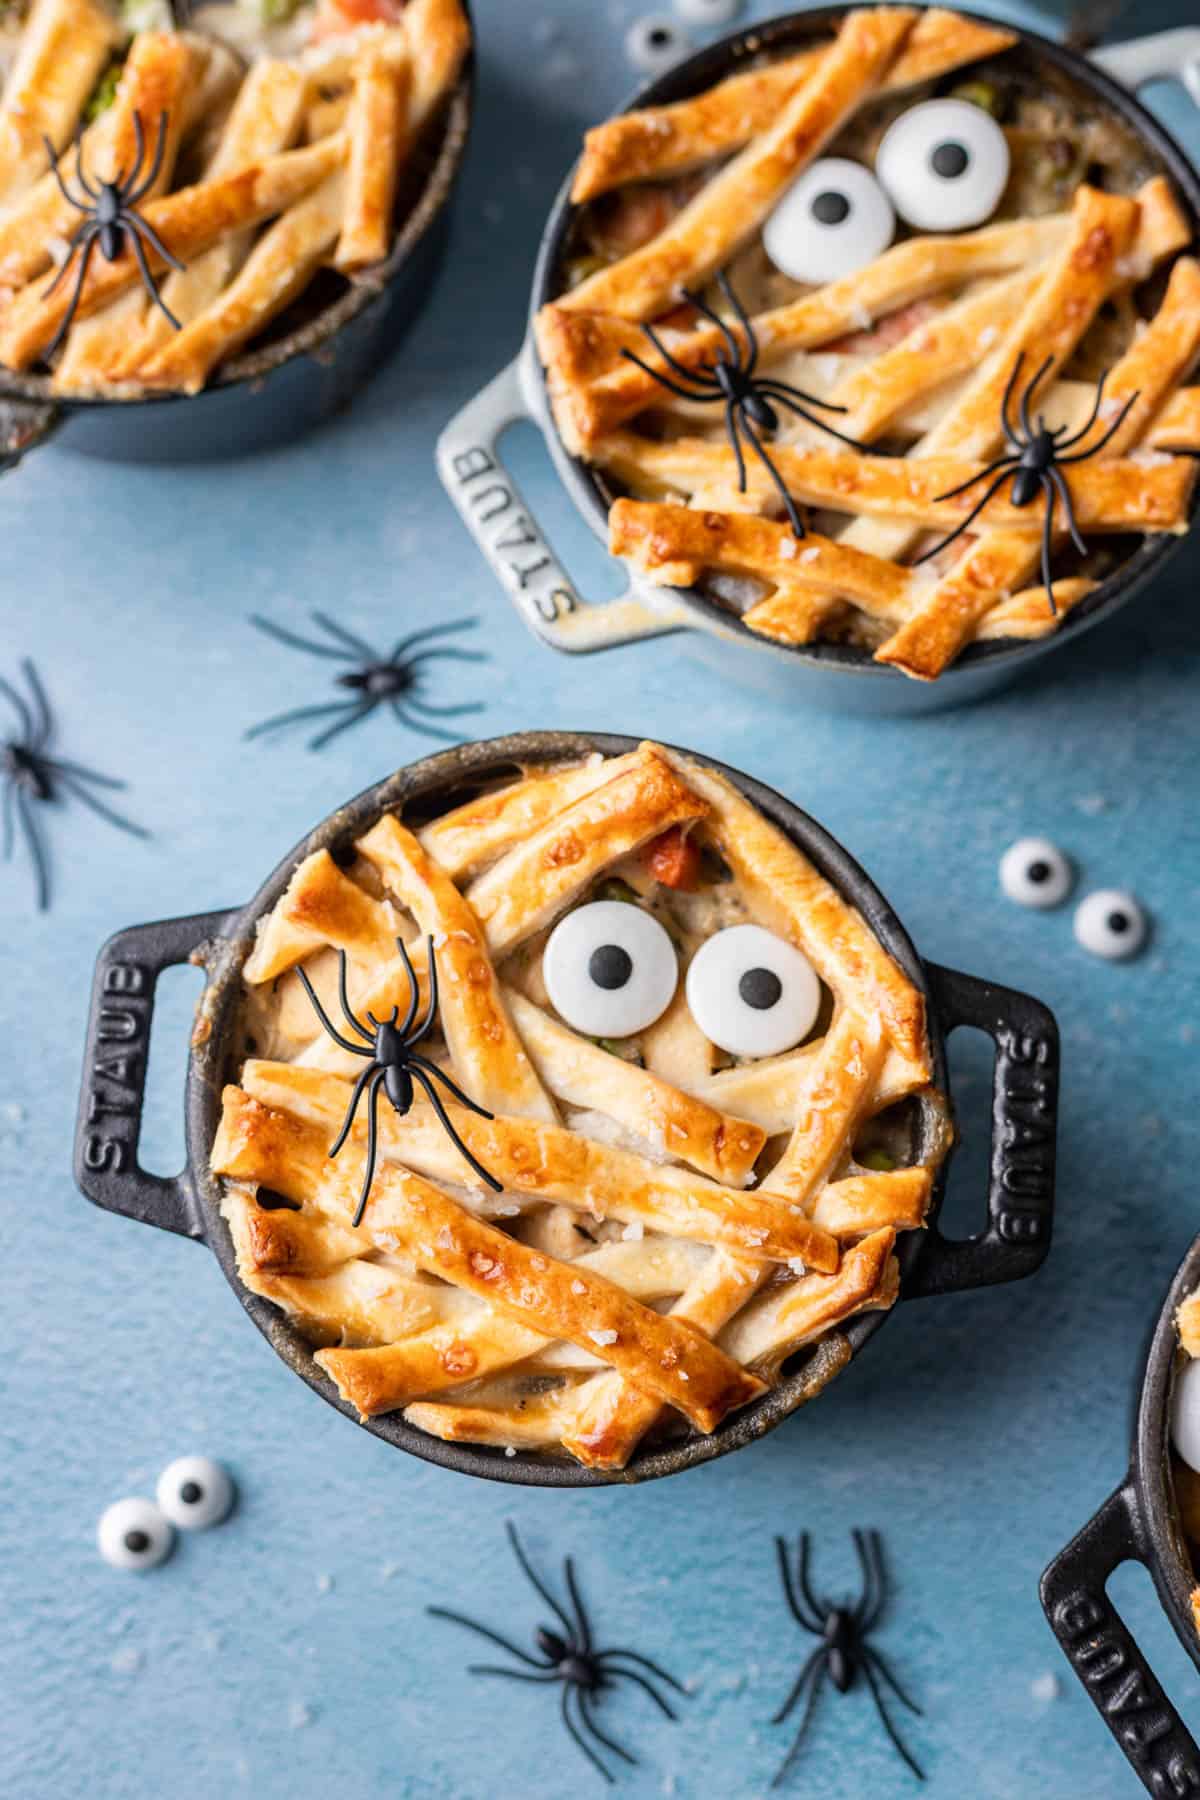 Mini chicken pot pies decorated like mummies for Halloween with plastic spiders and candy eyeballs on a blue background.